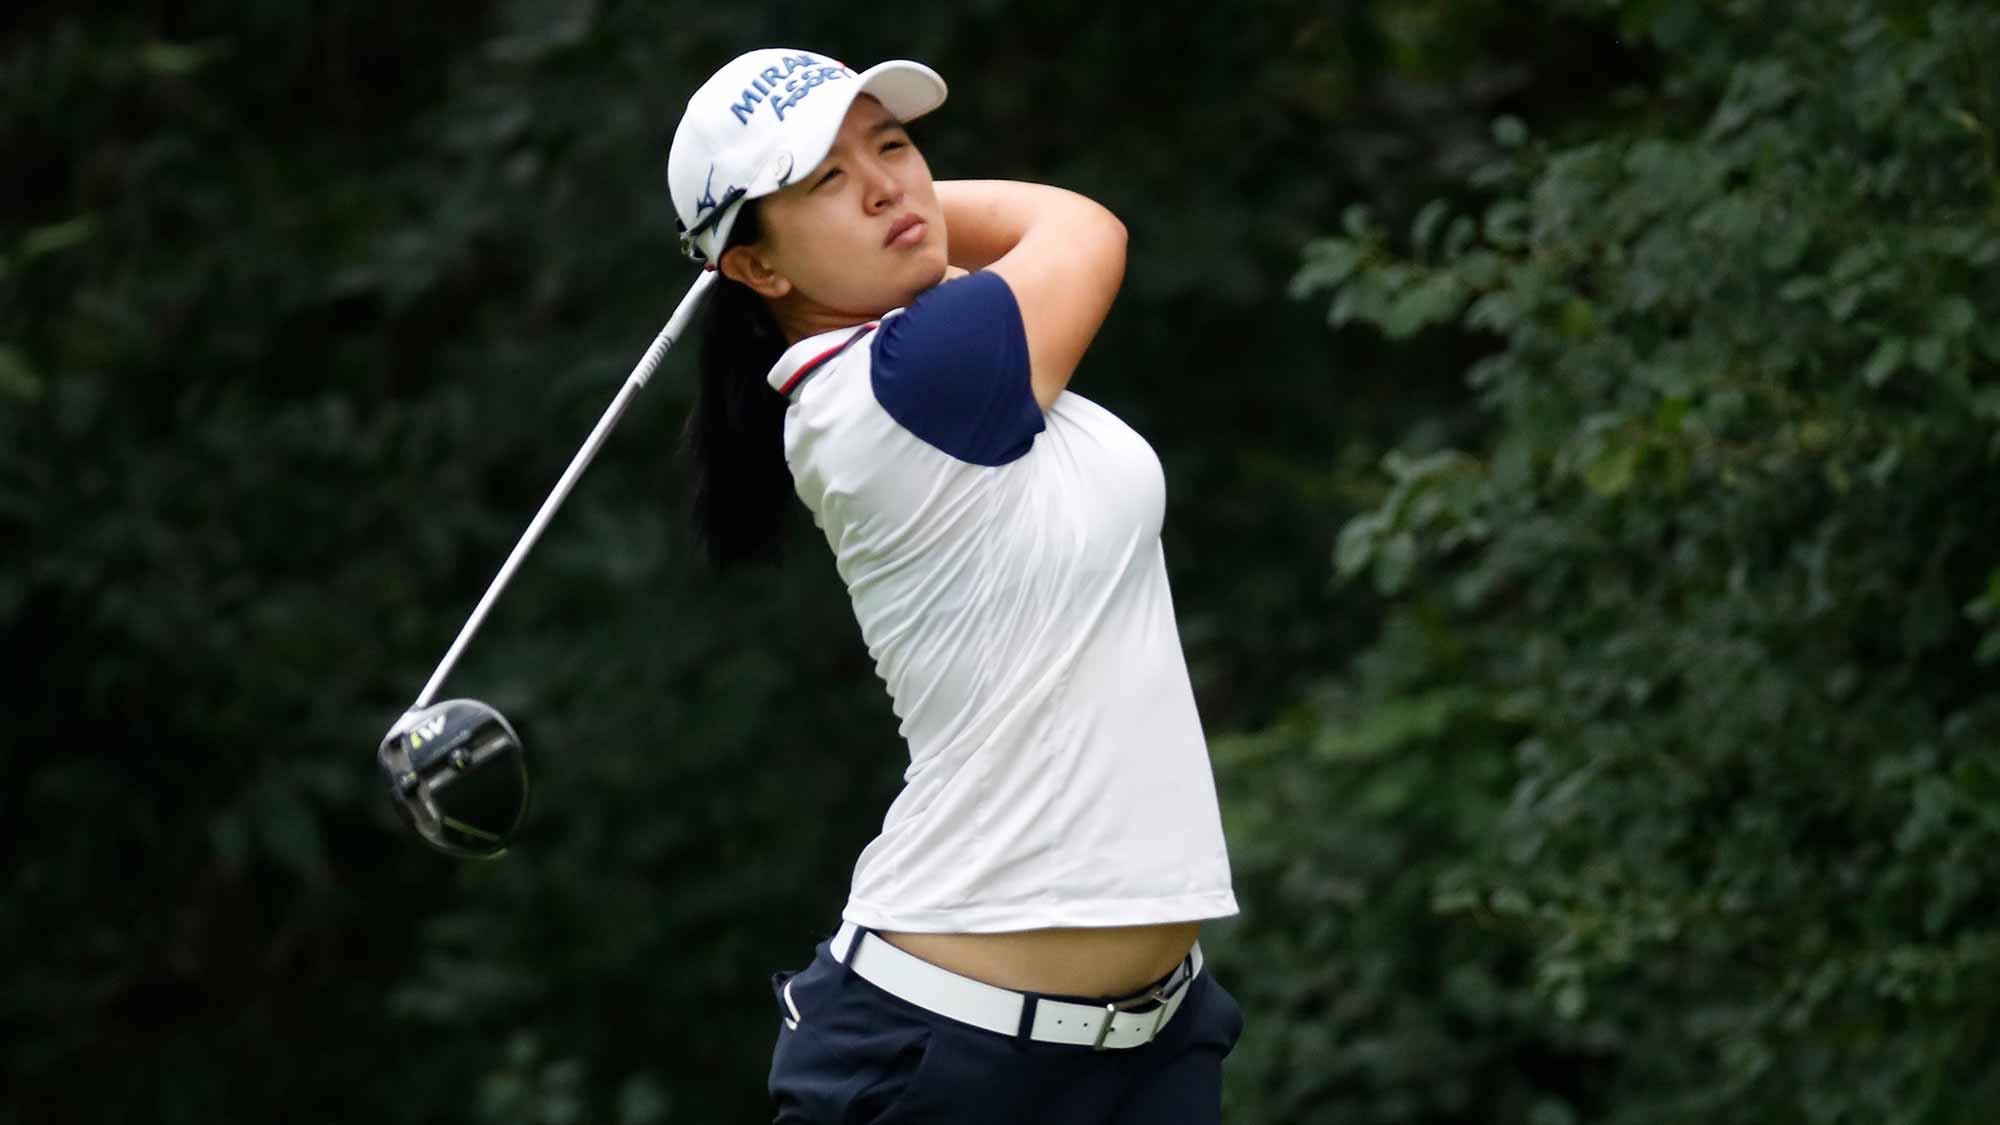 Sei Young Kim of South Korea hits her drive on the 13th hole during the second round of the 2017 KPMG PGA Championship at Olympia Fields Country Club 